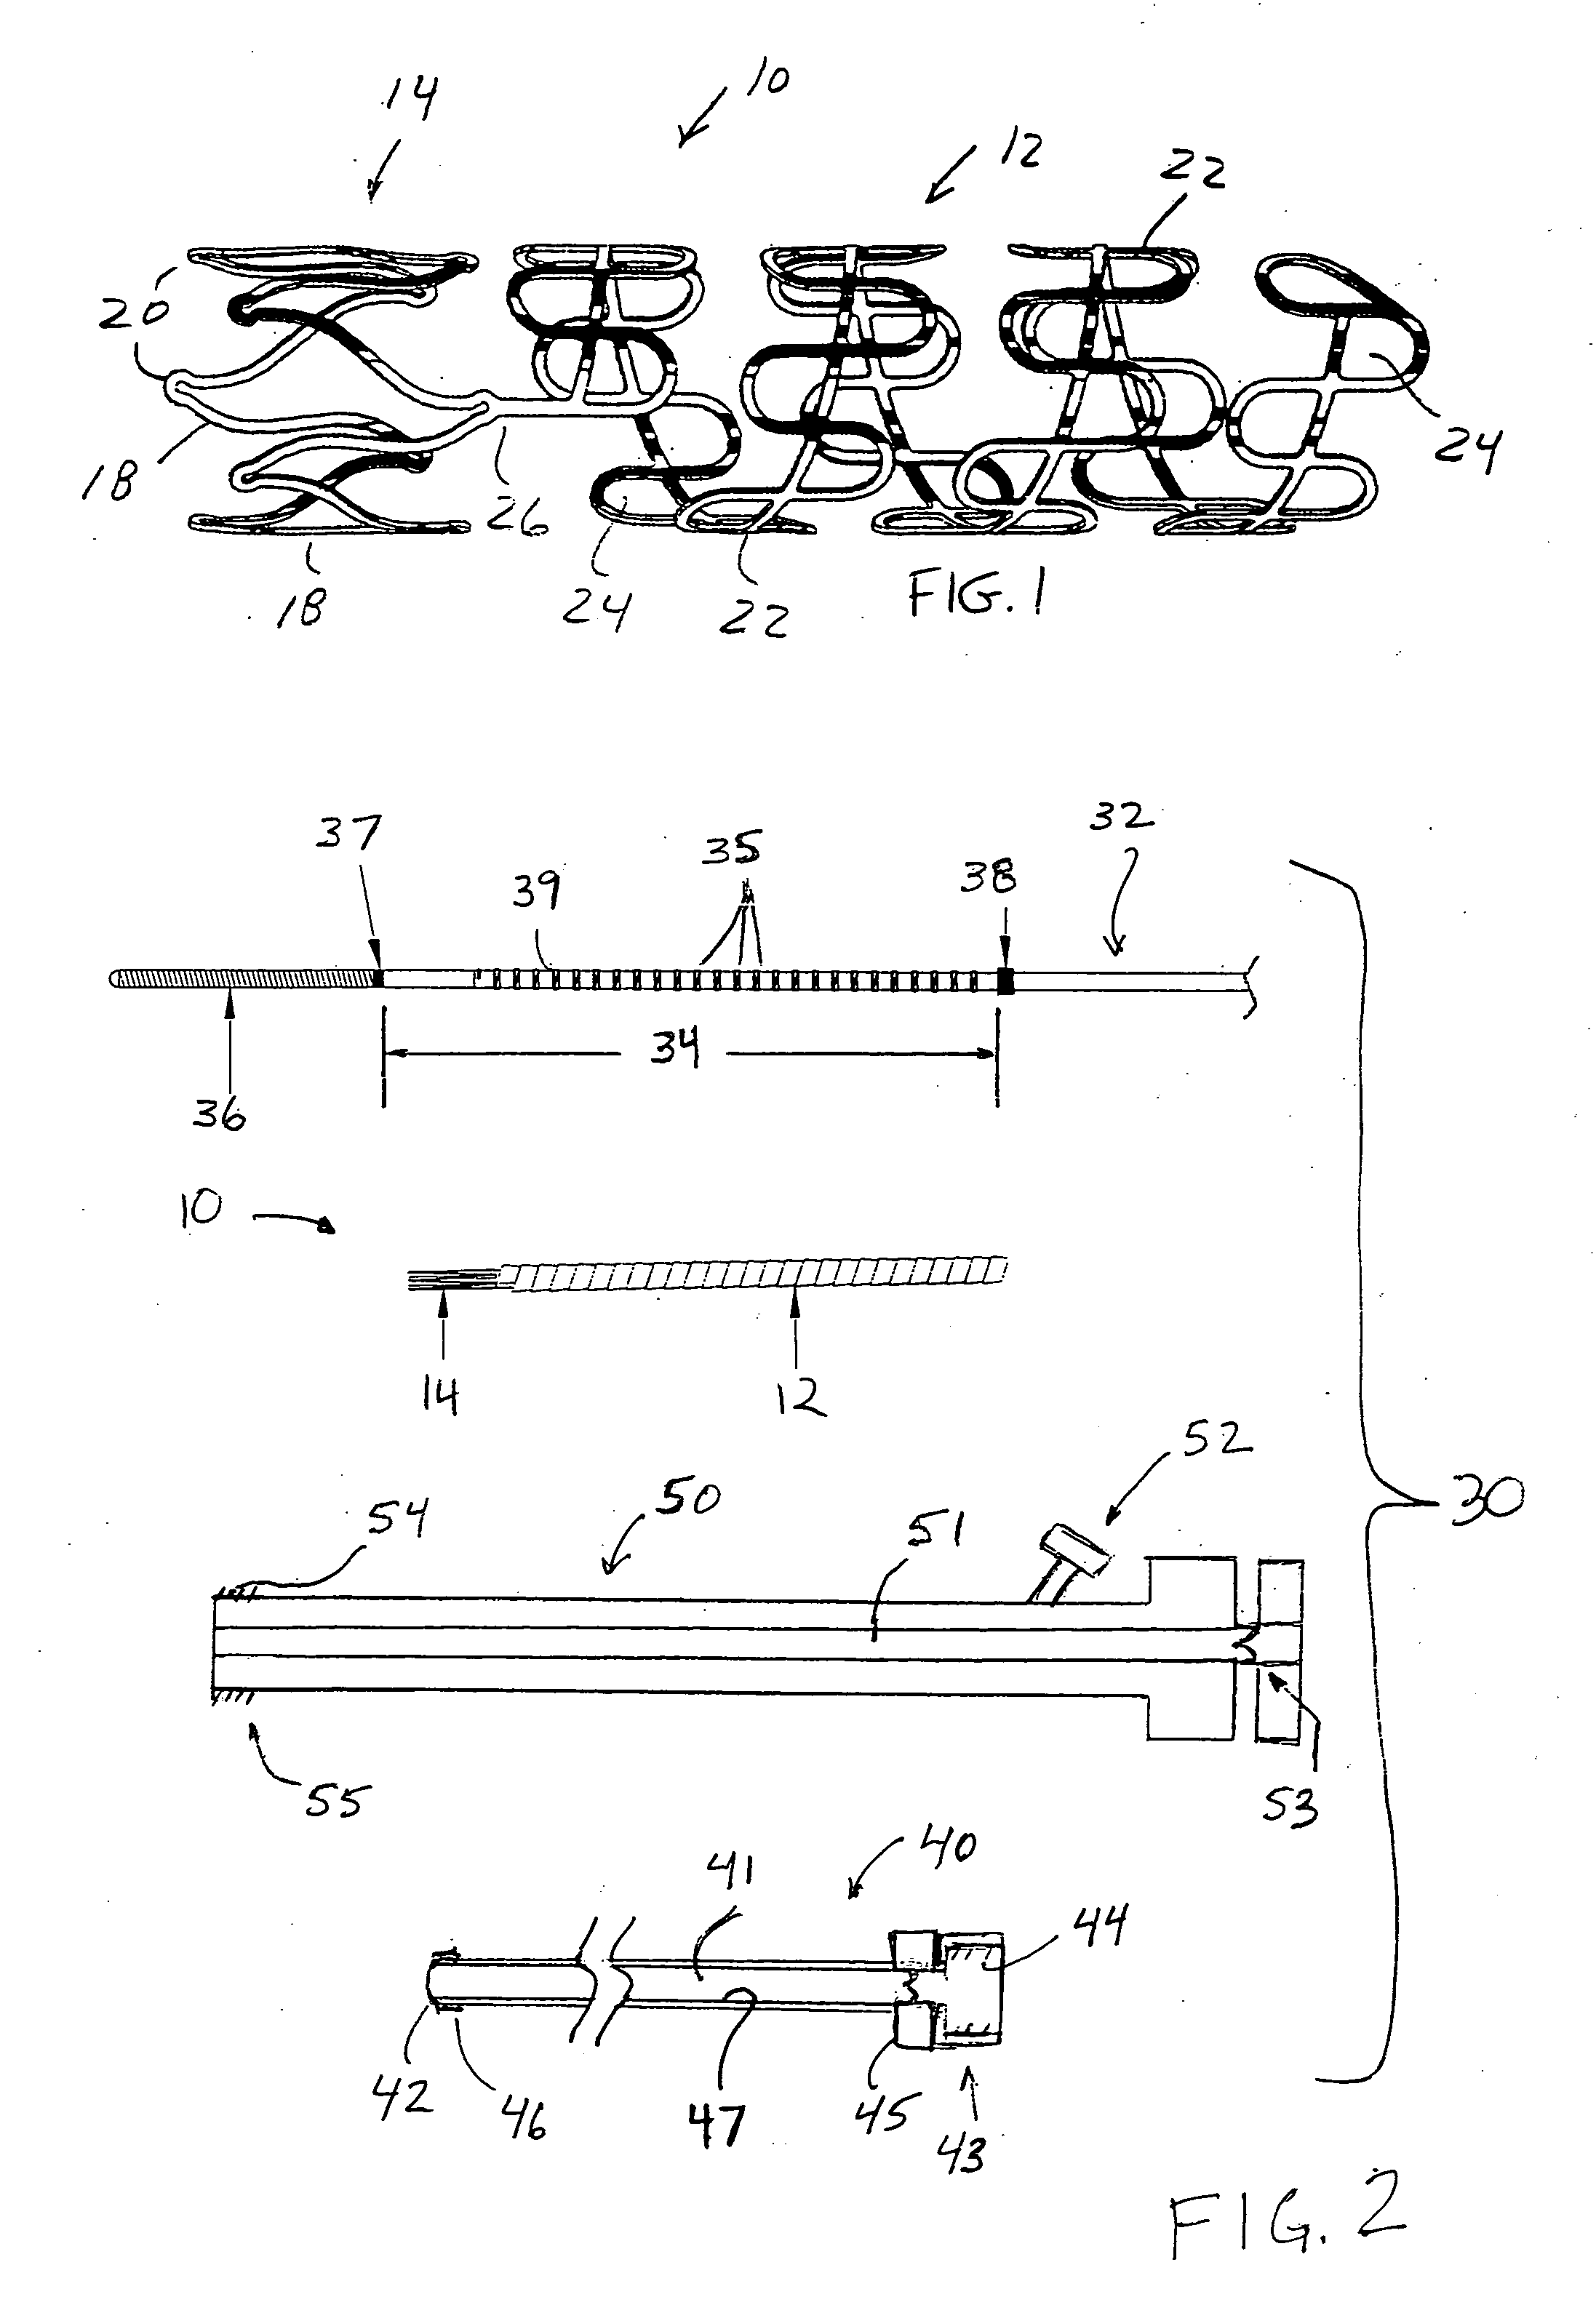 Delivery system for vascular prostheses and methods of use